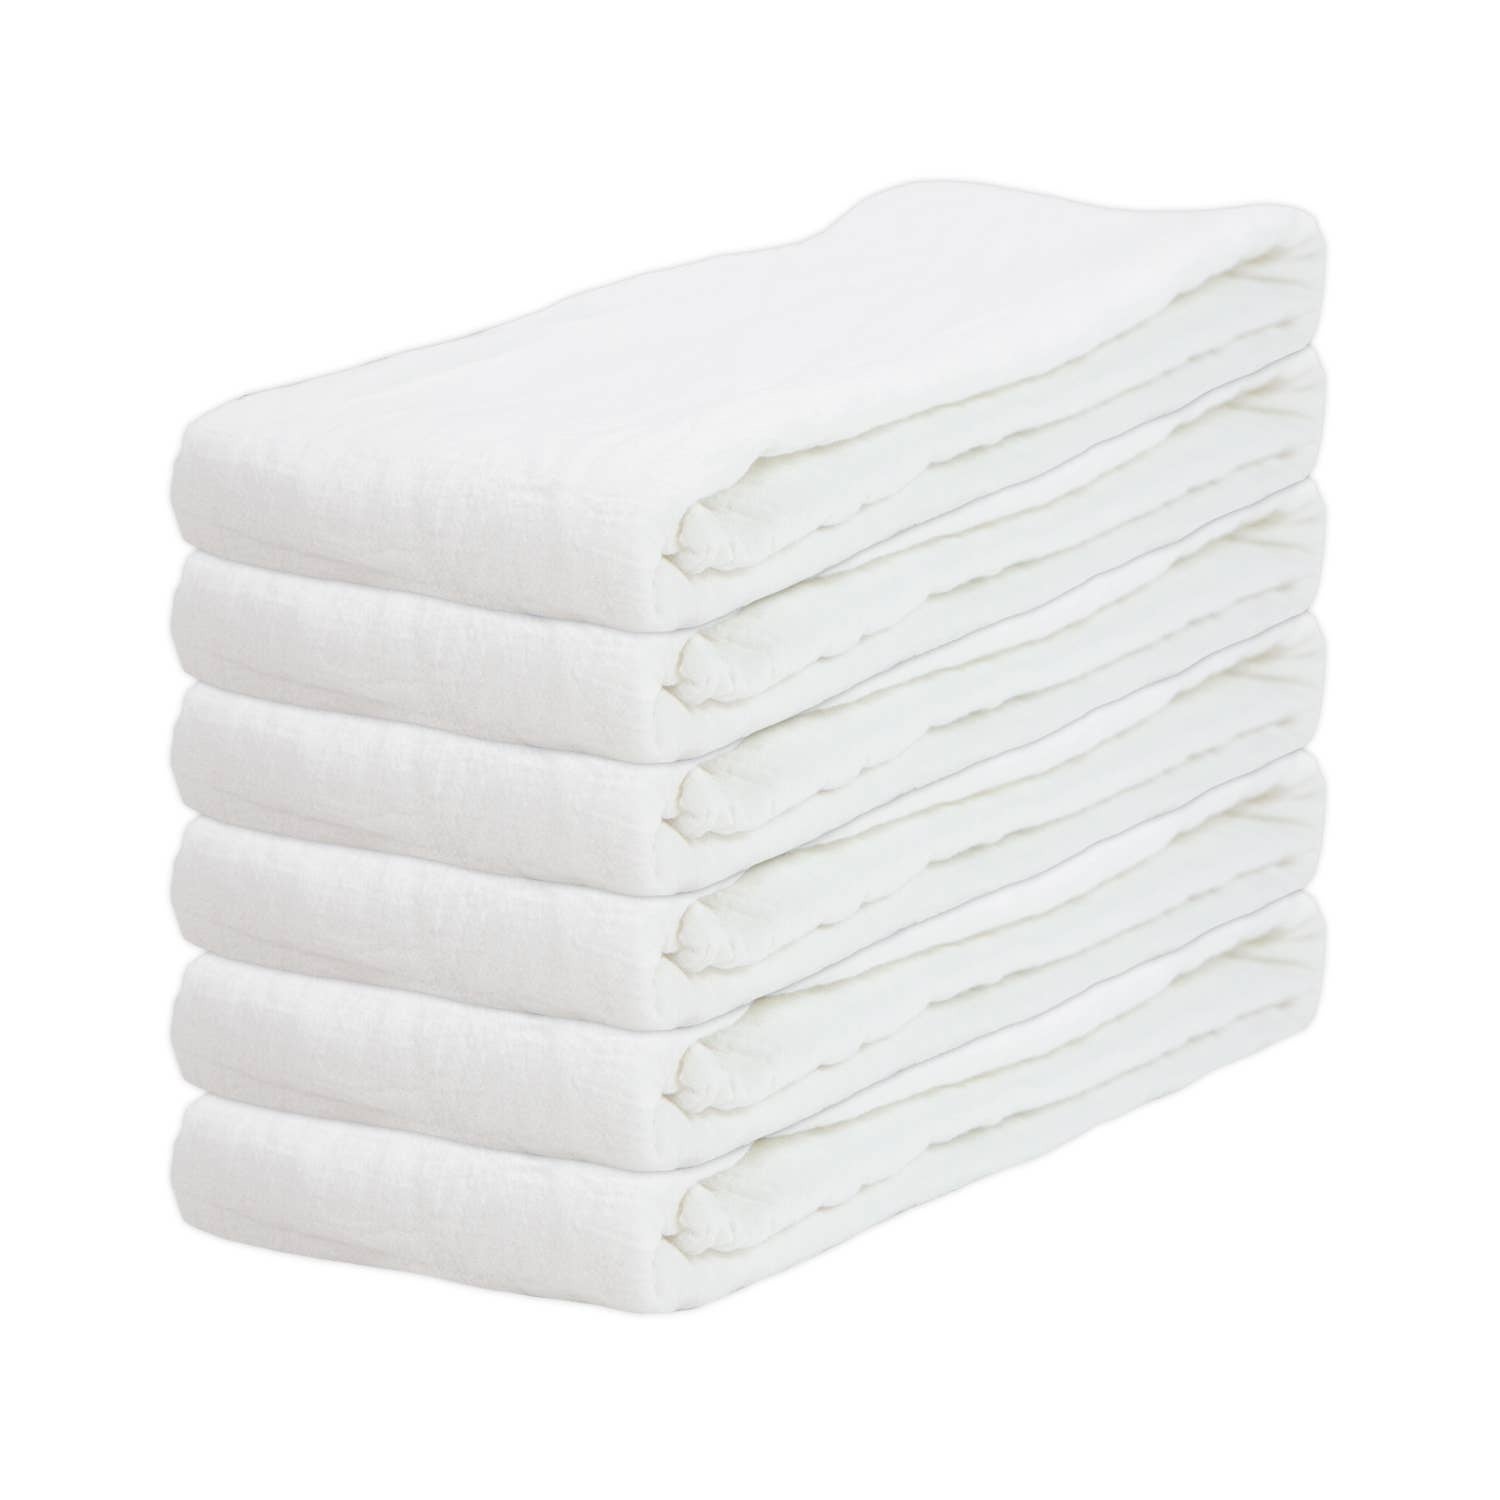 6 Pack of Kitchen Flour Sack Towels - Large 36 x 36 - White